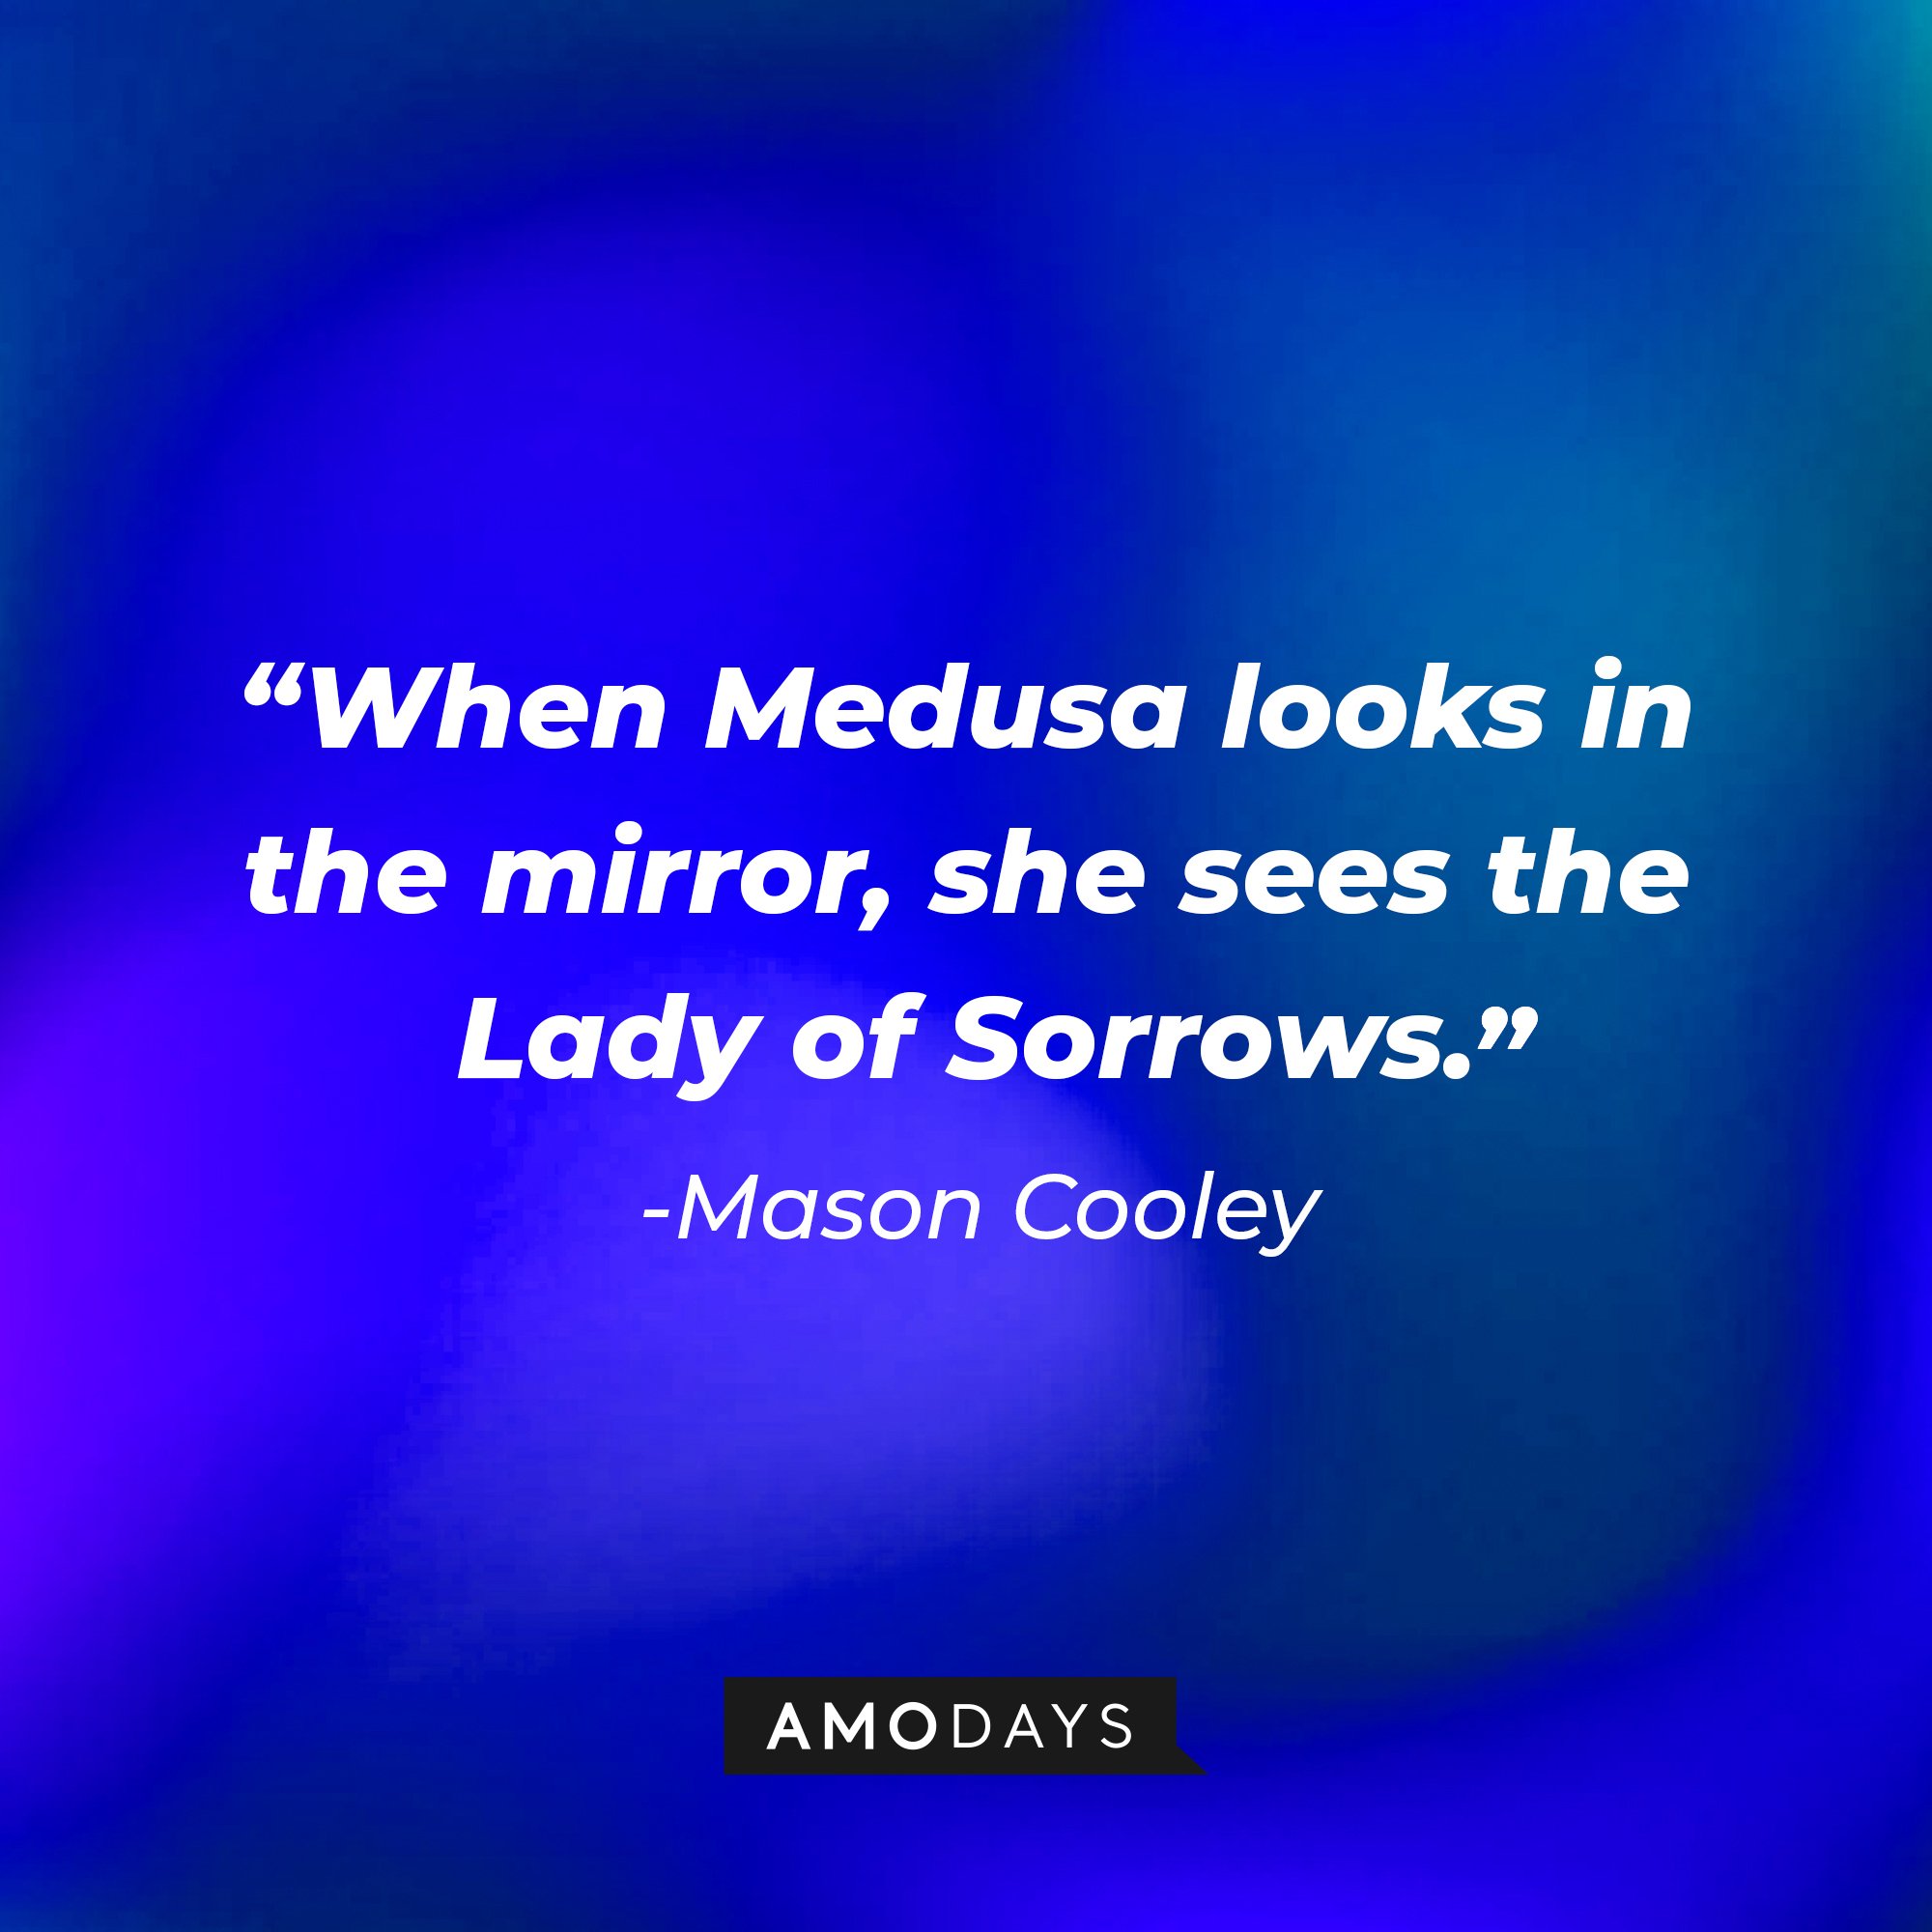 Mason Cooley’s quote: “When Medusa looks in the mirror, she sees the Lady of Sorrows." | Image: AmoDays